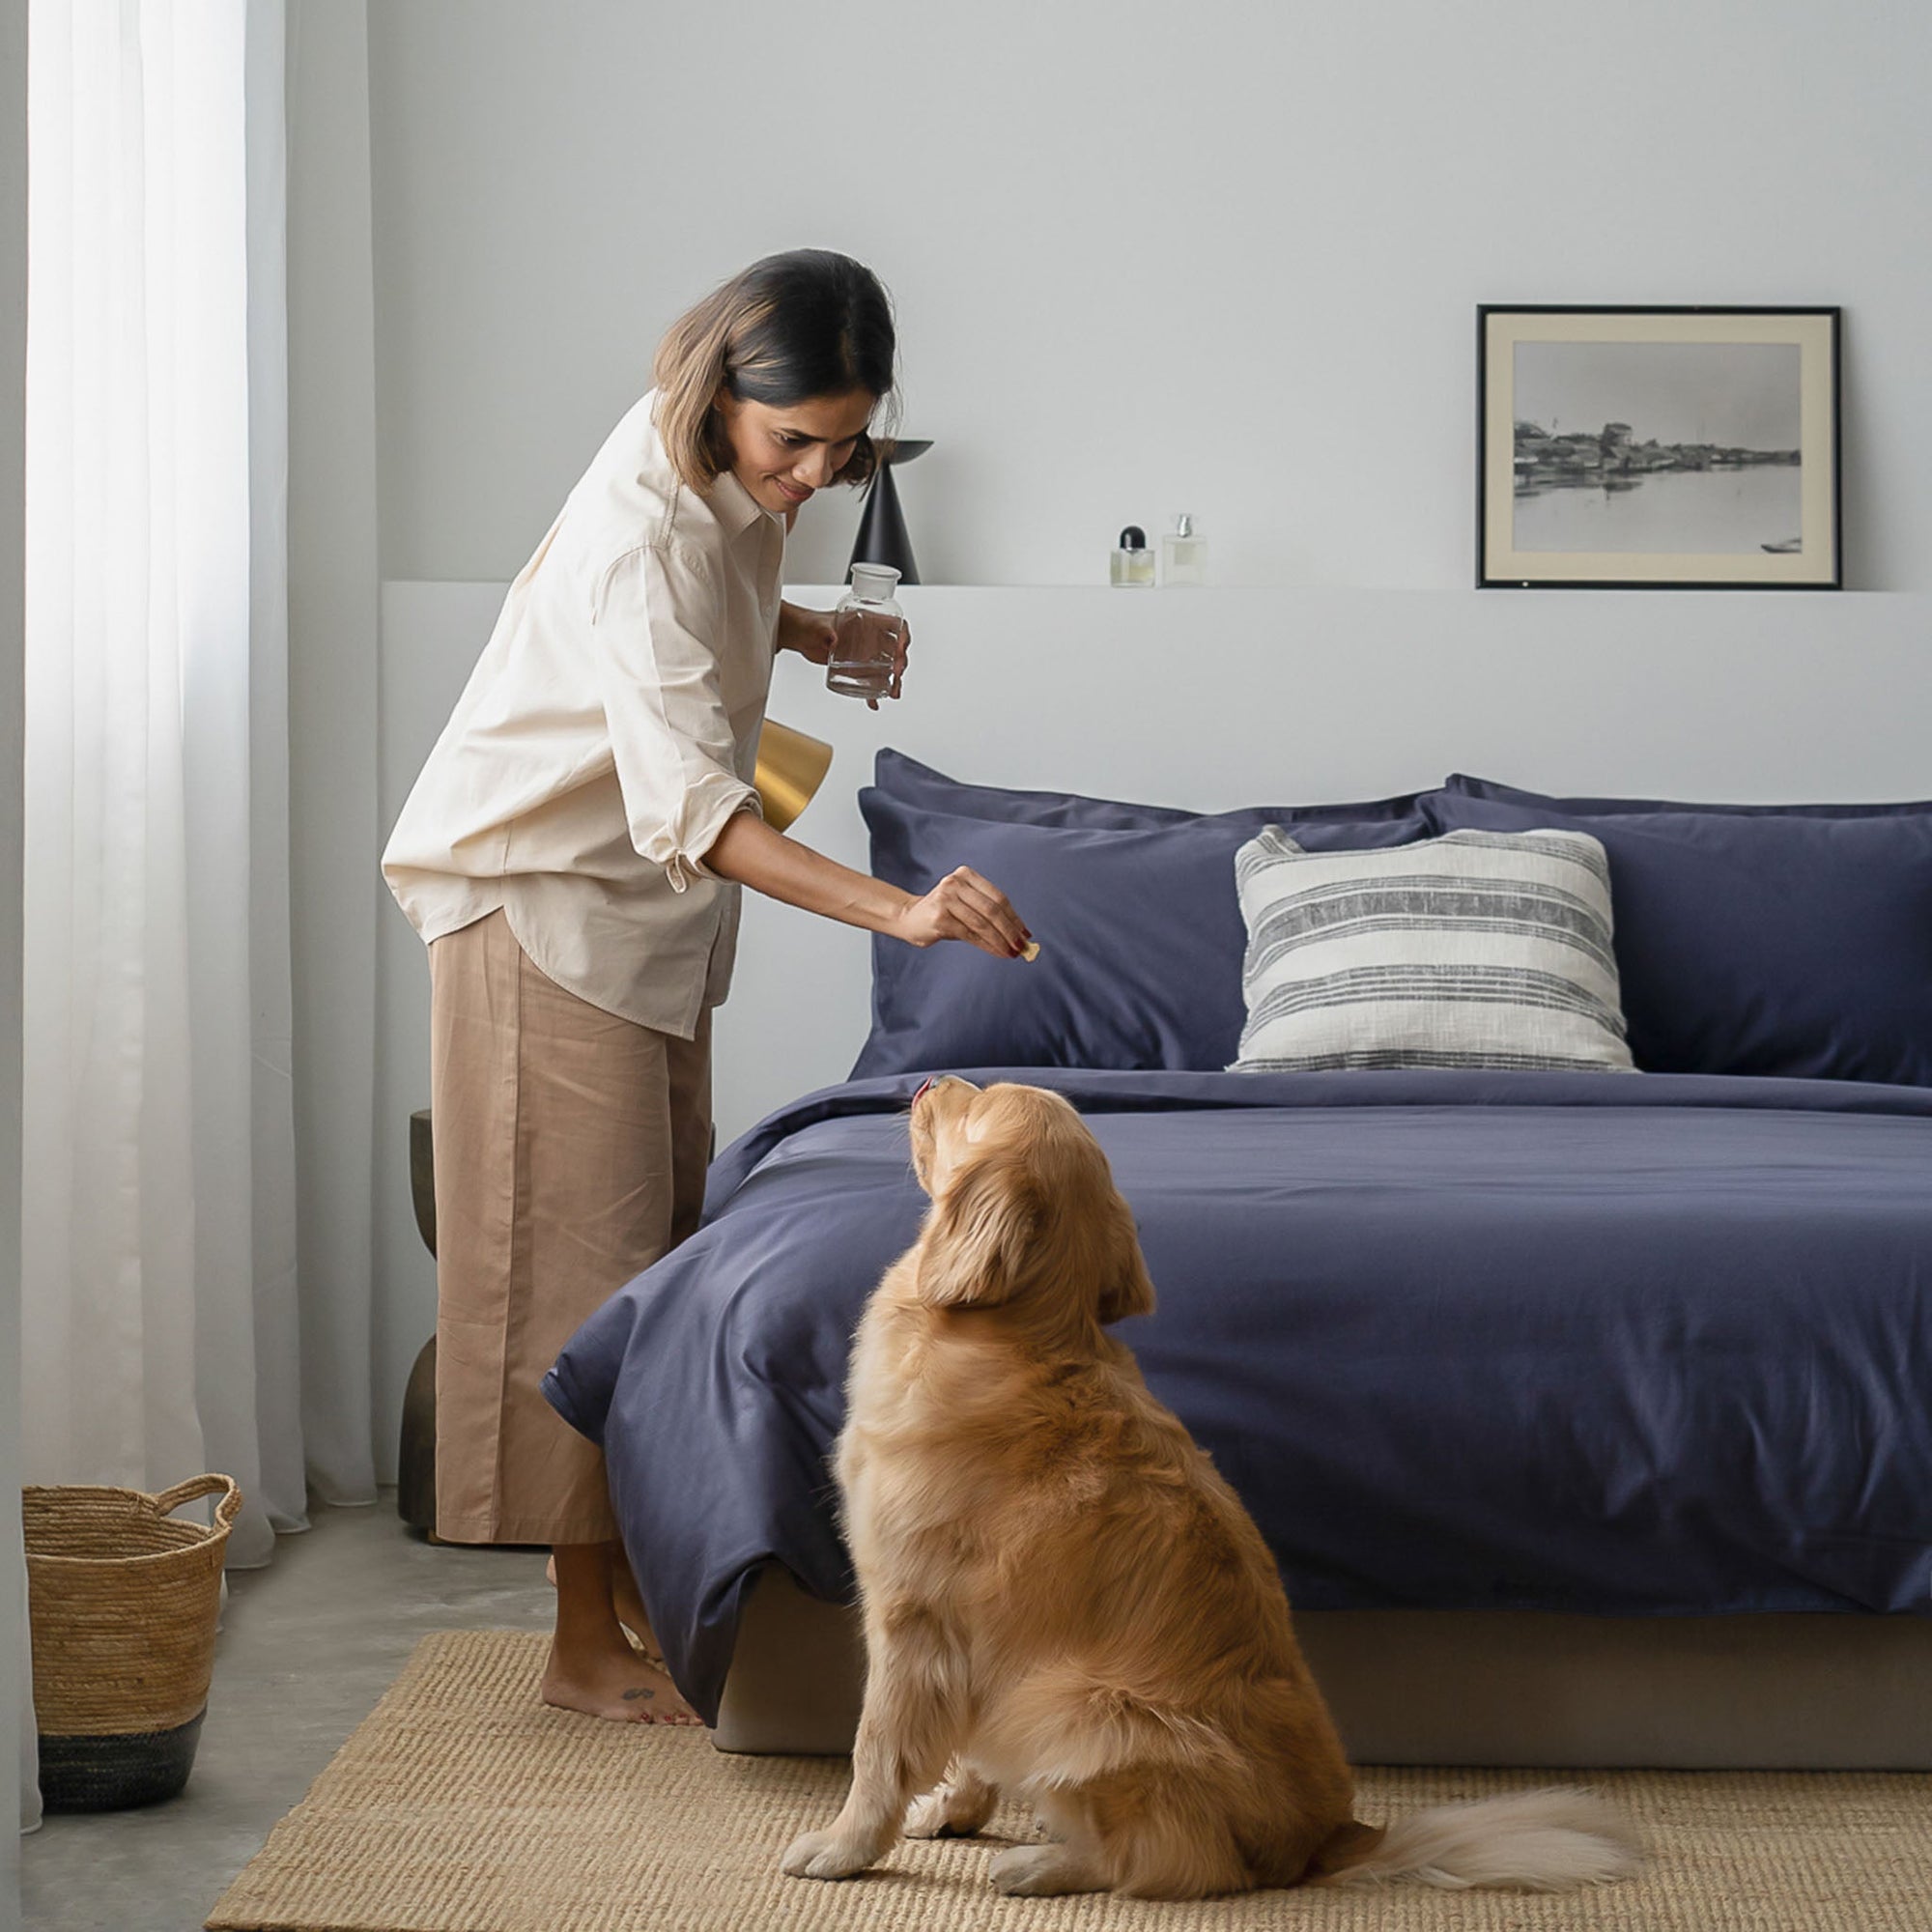 Dark Blue Cotton Bed Sheets Fitted Sheet Set with Tencel fitted sheet, Tencel Pillow Case, Tencel Duvet Cover. Buy Dark Blue Tencel Fitted bed sheet set at Weavve Home, Shop Egyptian Cotton Bed Sheets Singapore and Luxury Hotel Sheets. 400 High Thread Count Bed Sheet. 